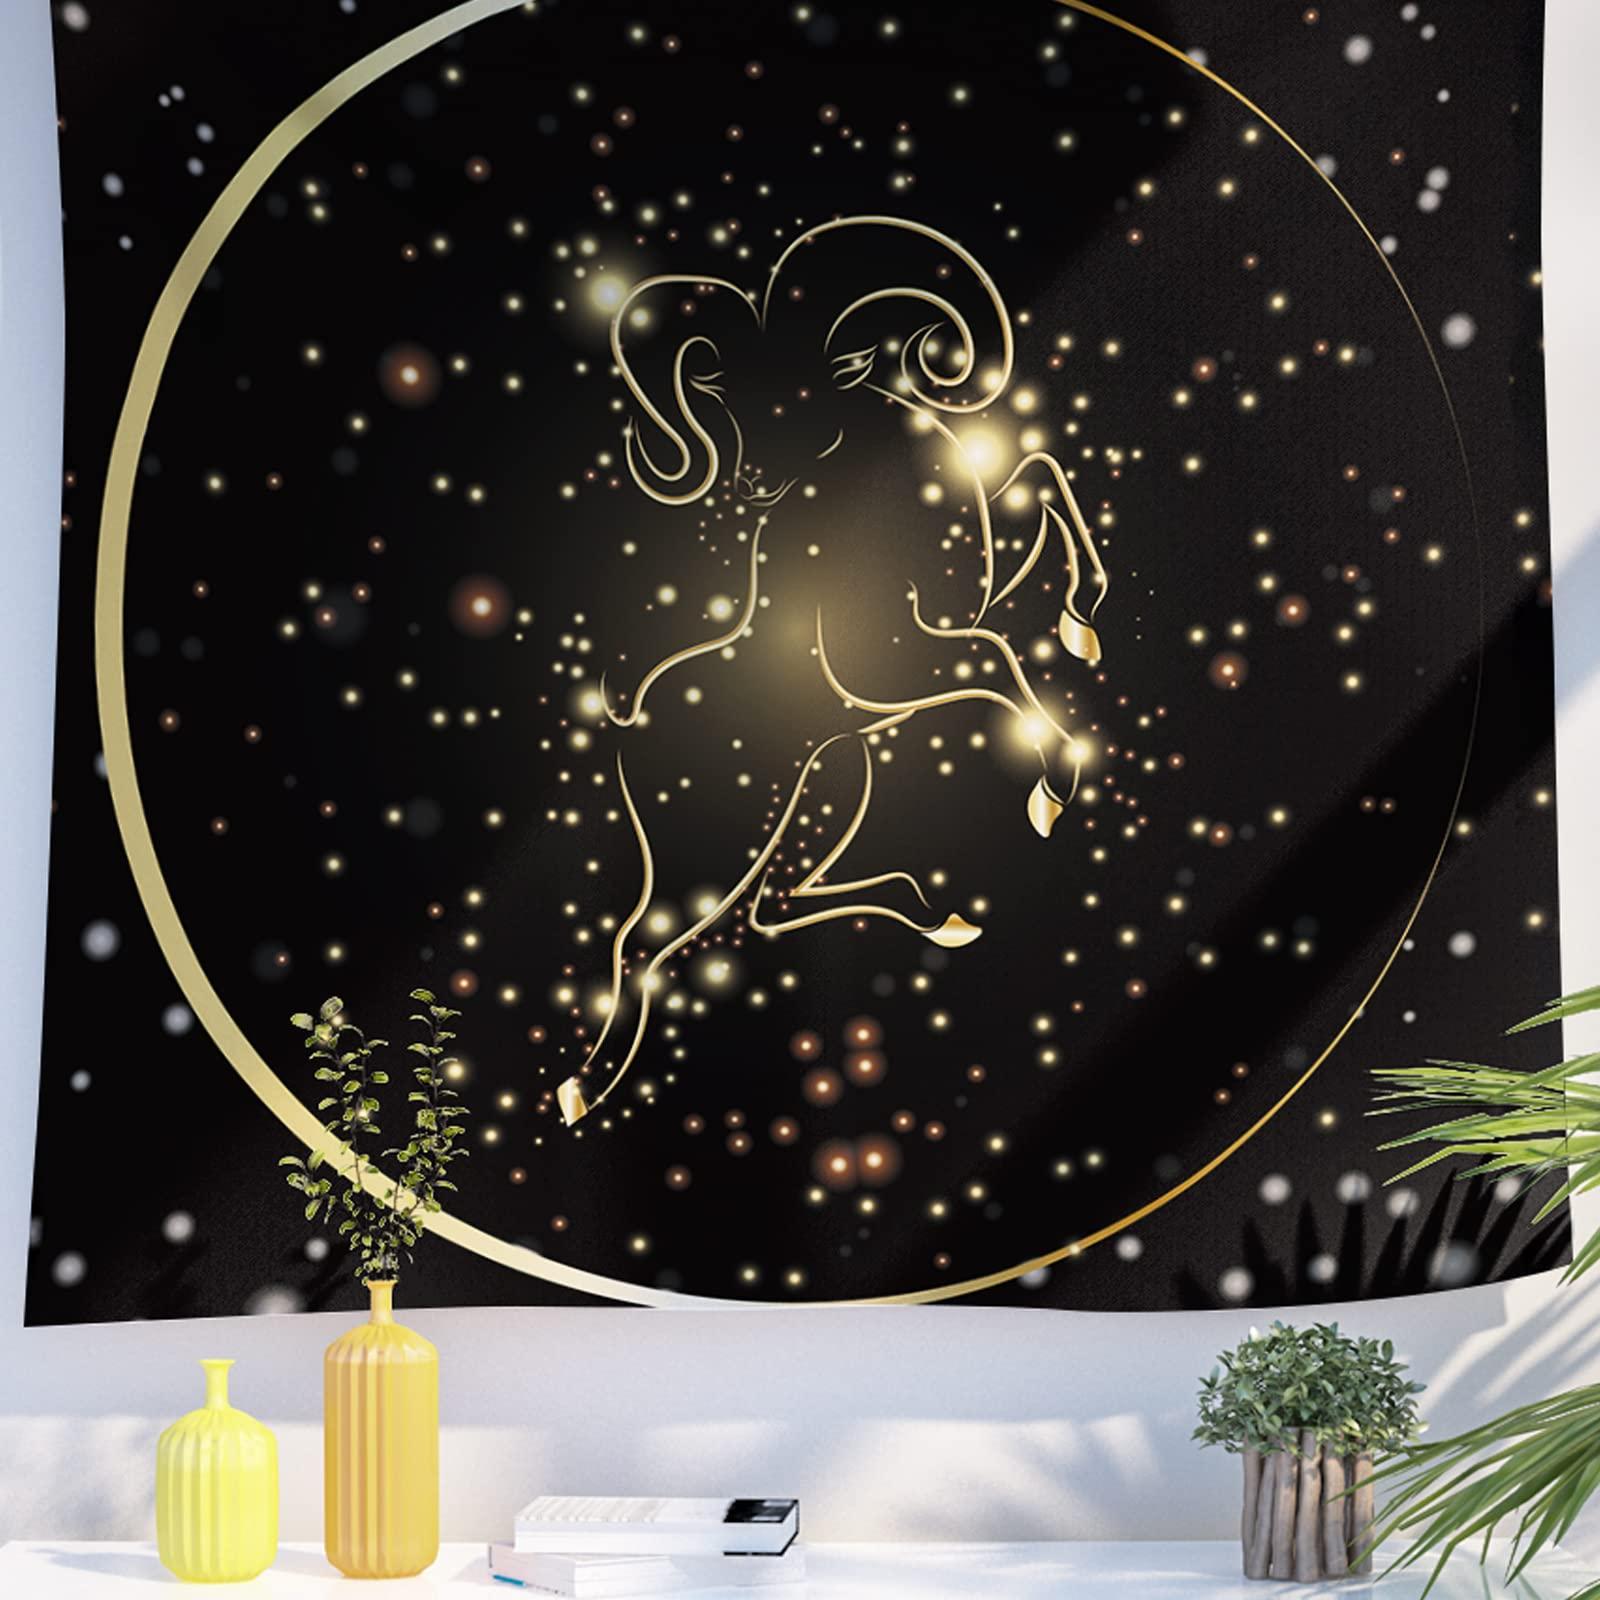 Berkin Arts Decor Tapestry for Wall Hanging Premium Polyester Fabric Backdrop Space Art Gemini Gold Cloth 51.2 x 59.1 Inch